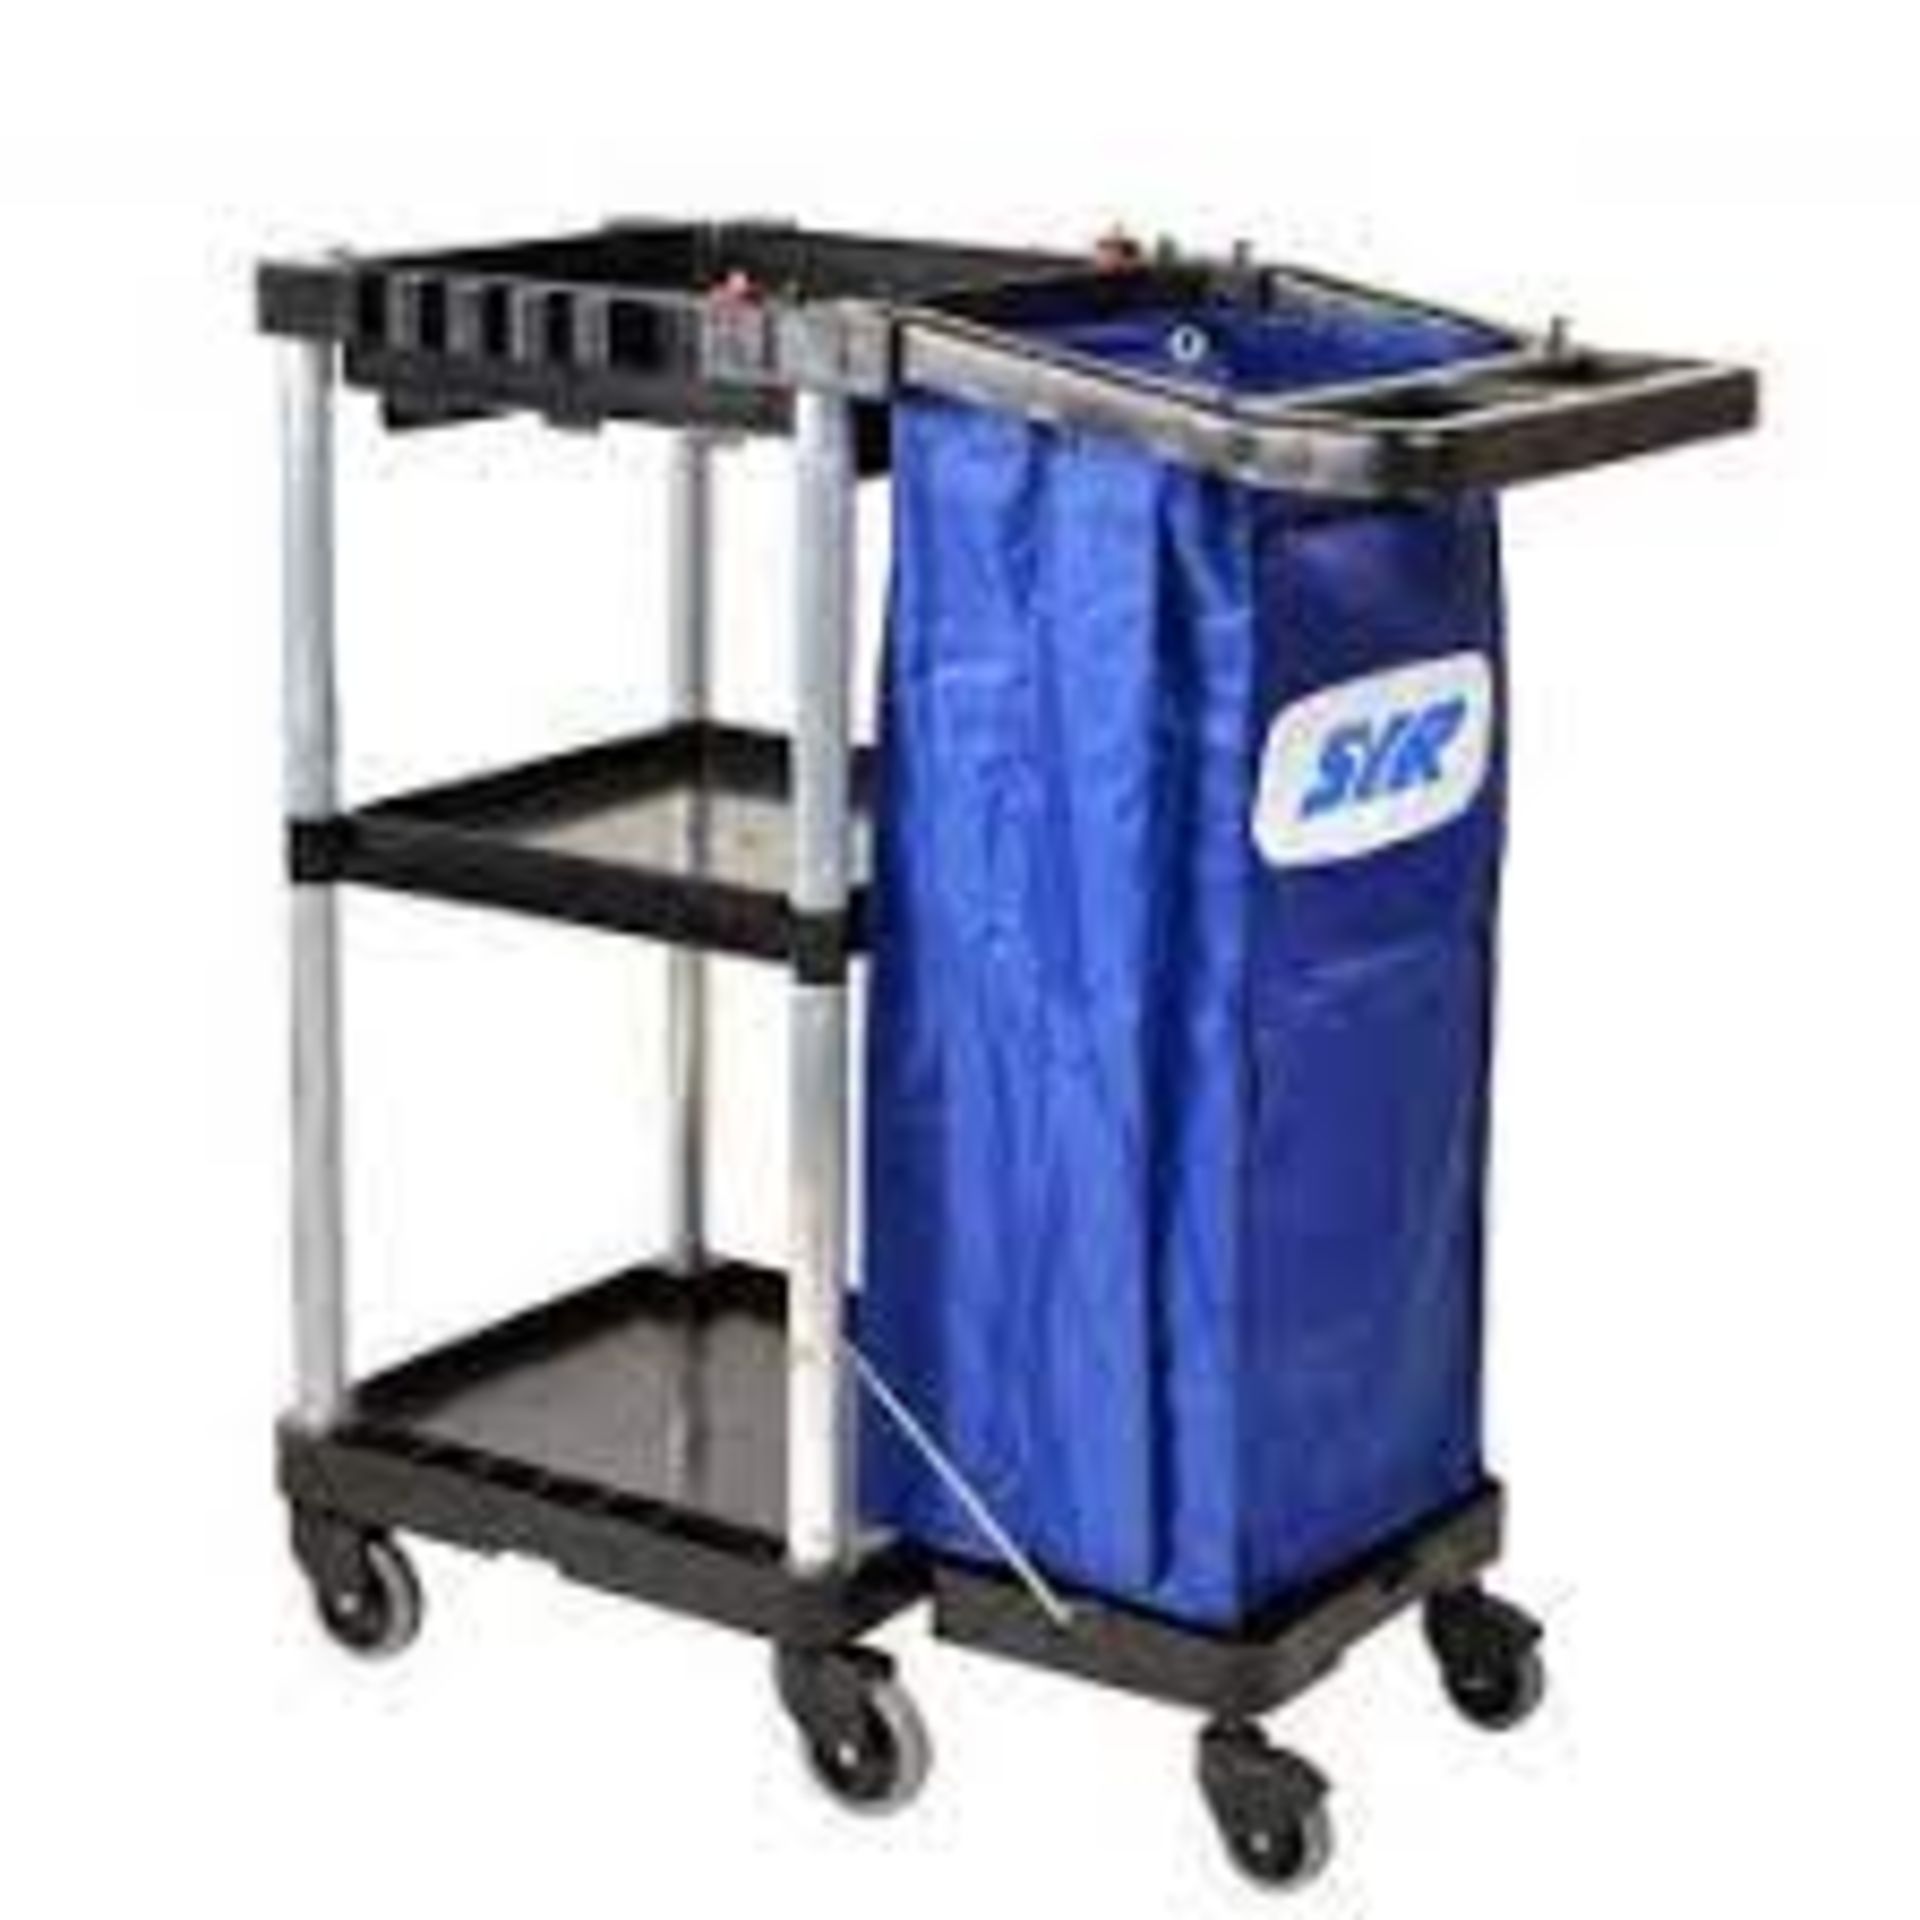 BRAND NEW SIR SPACESAVER JANITORIAL TROLLEY WITHOUT CUT OUT RRP £199 R1-1